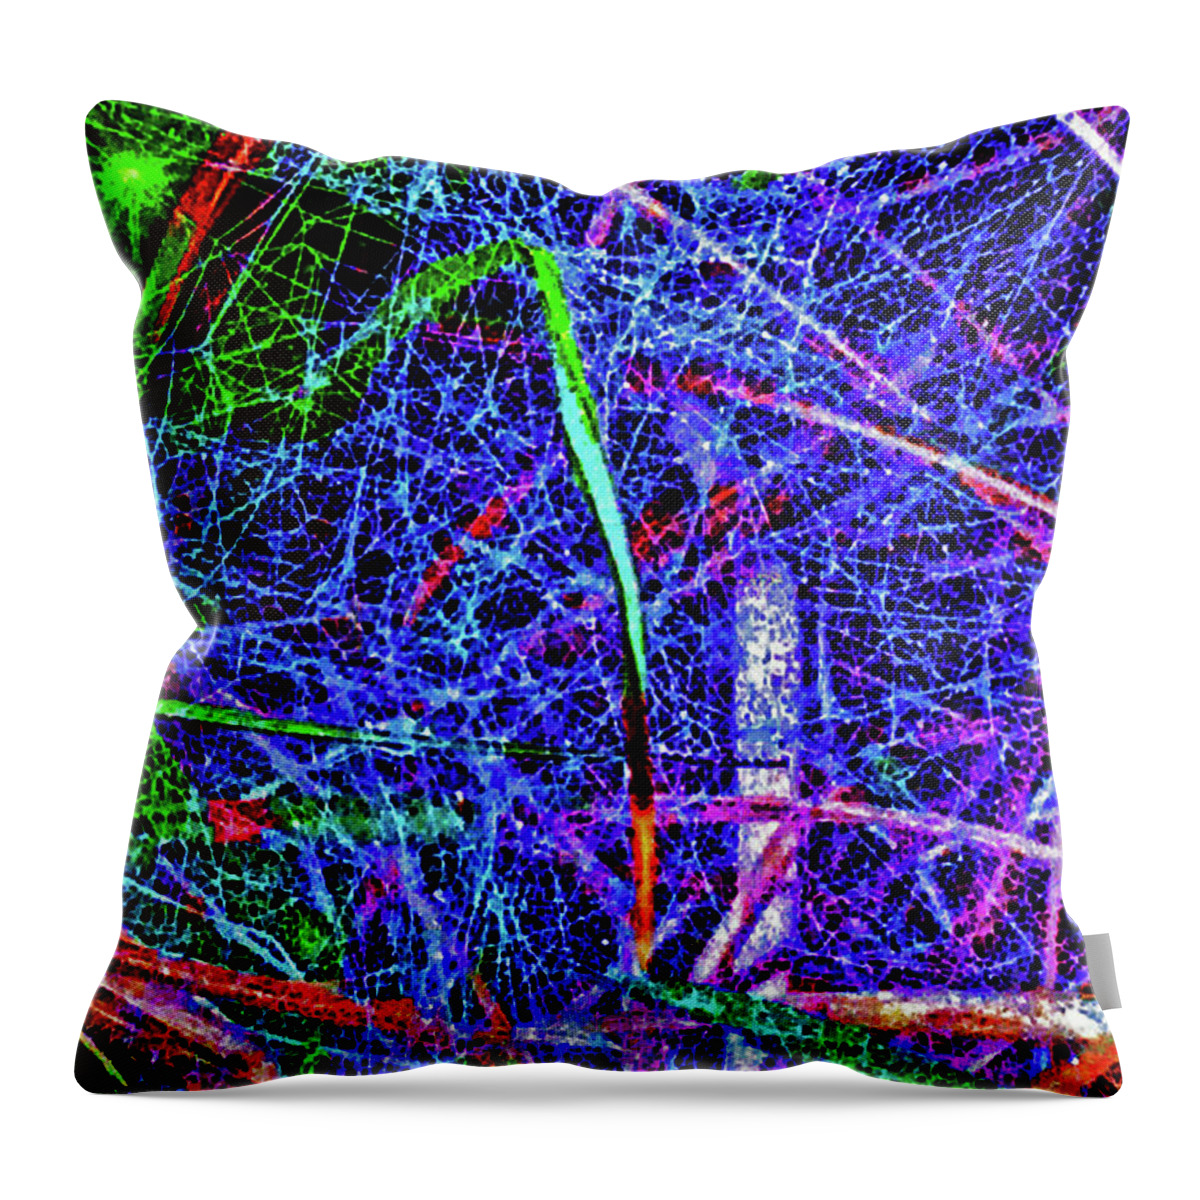 Web Throw Pillow featuring the photograph Amazing Invisible Web by Gina O'Brien